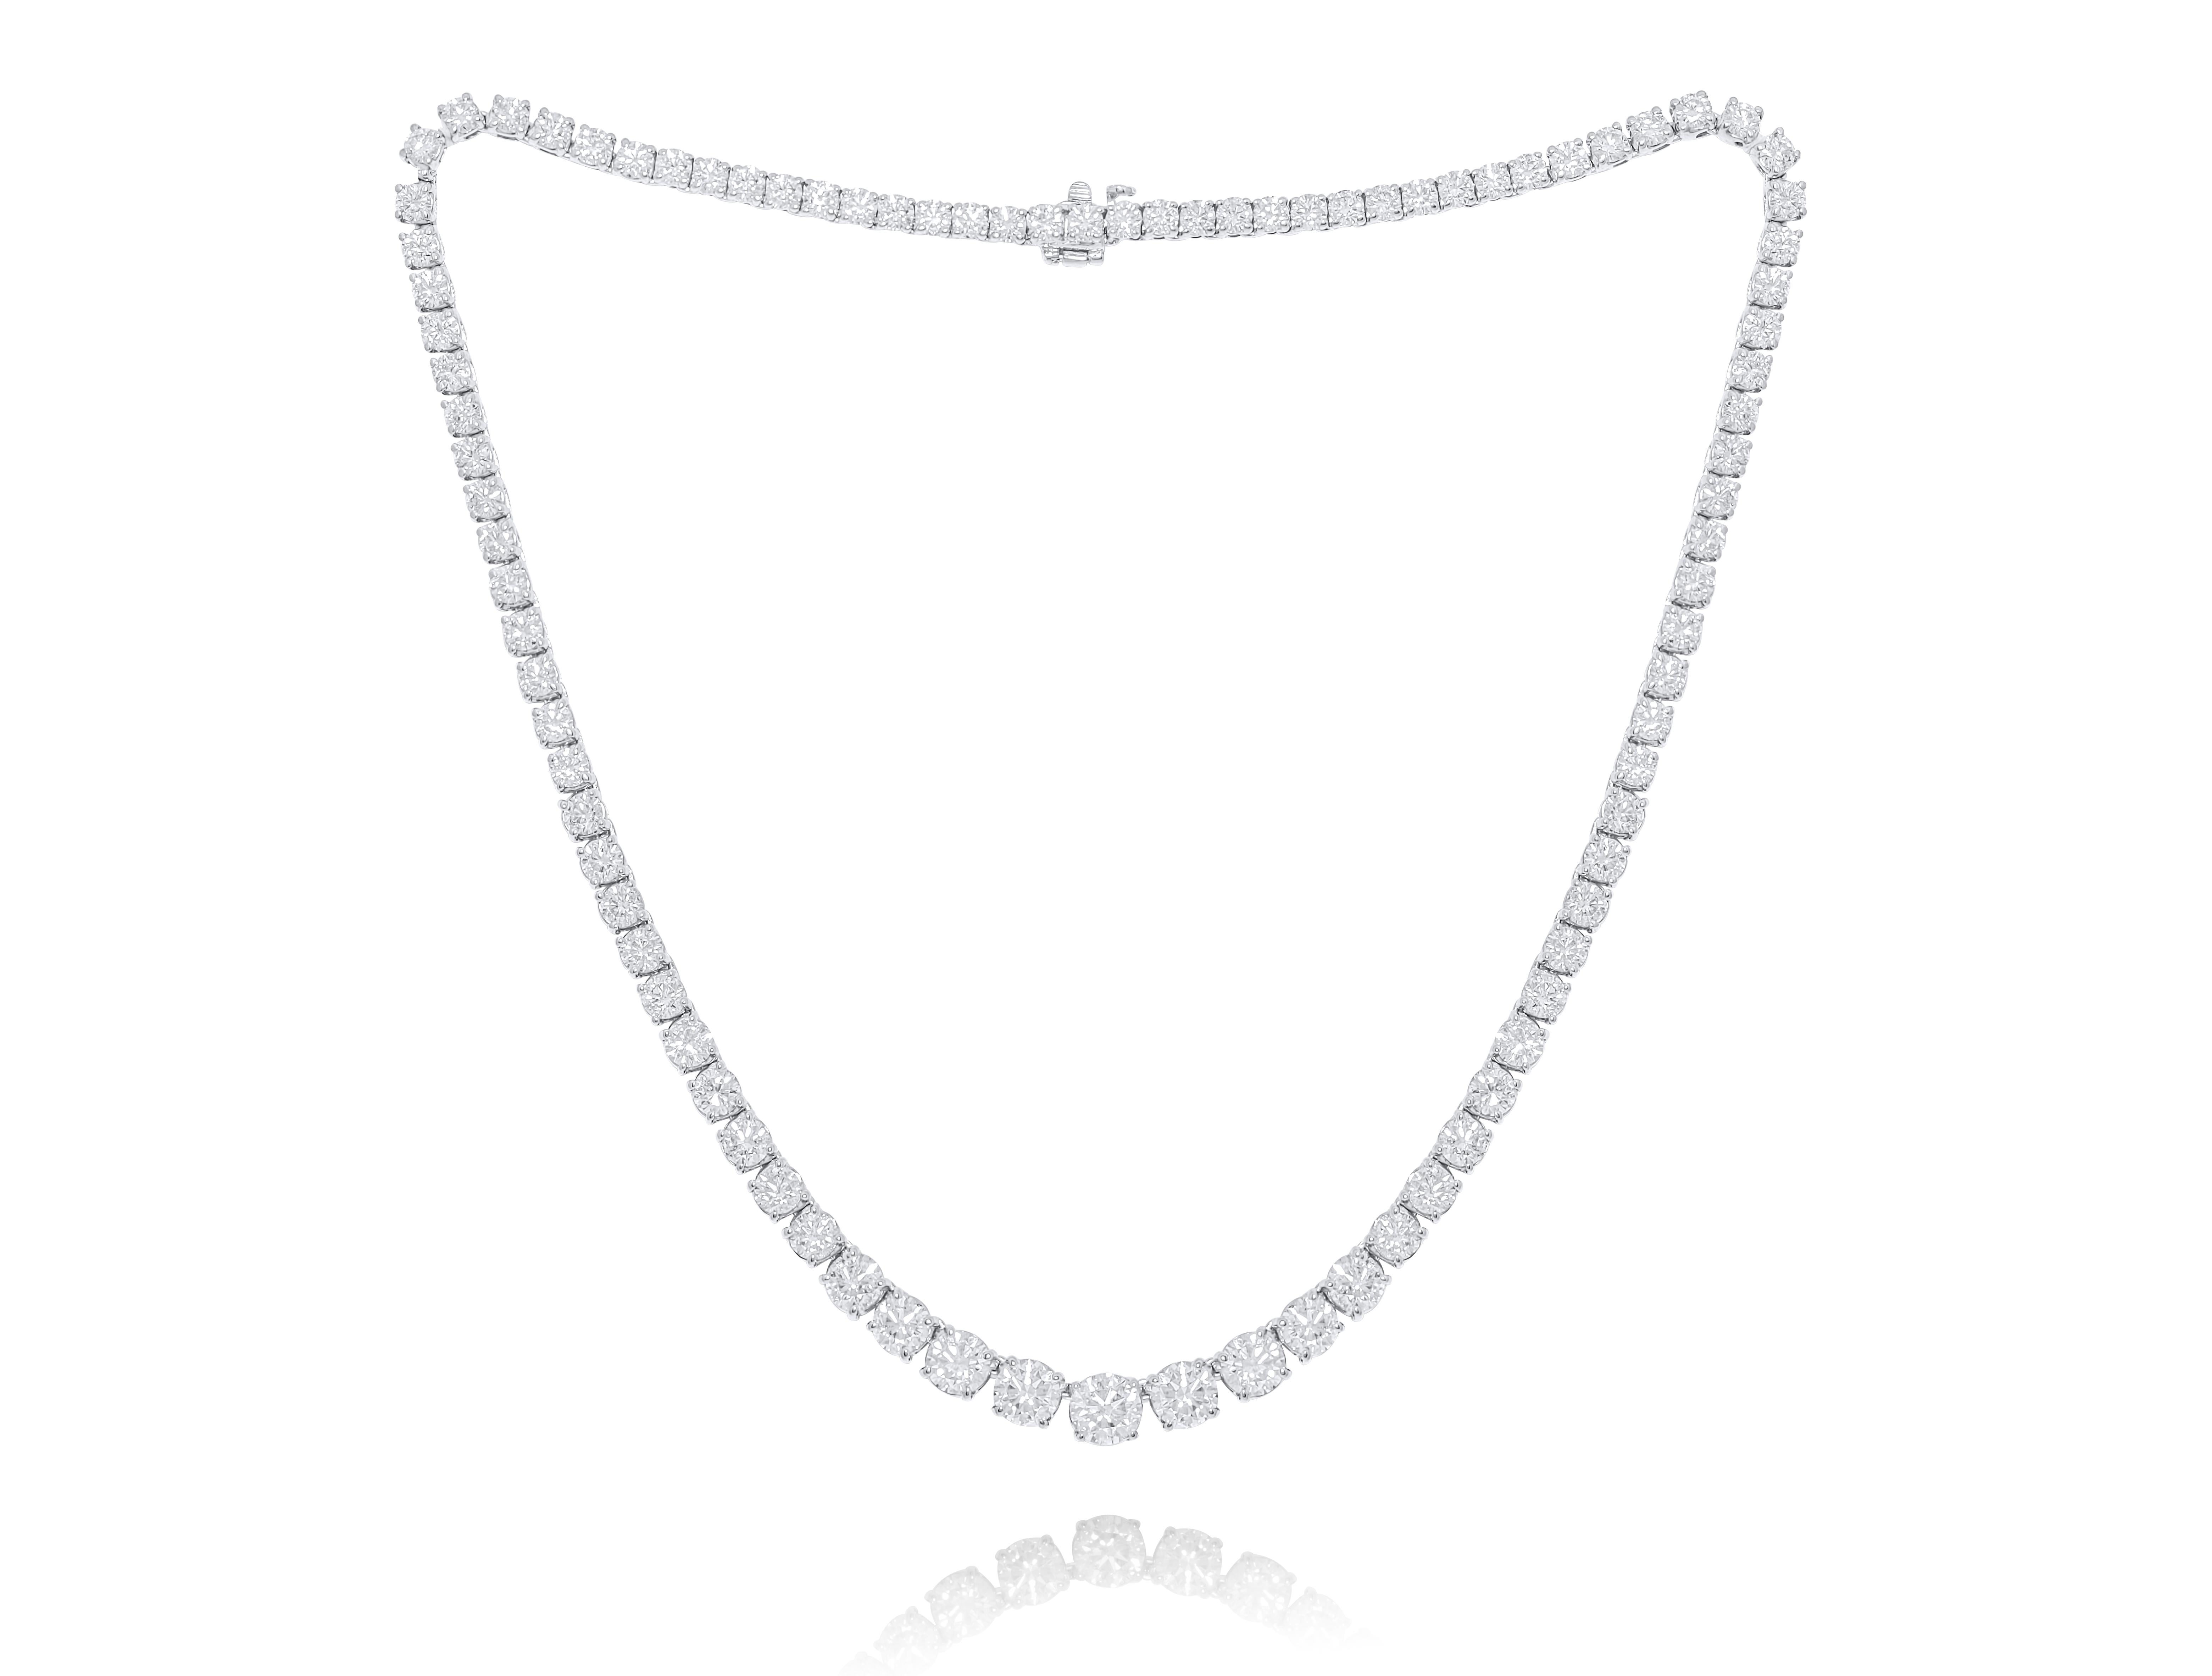 Custom 18k white gold graduated tennis necklace  17.00 cts of round brilliant diamonds set in a 4 prong setting 107 stones 0.16 each FG color SI clarity. Excellent  cut. 
